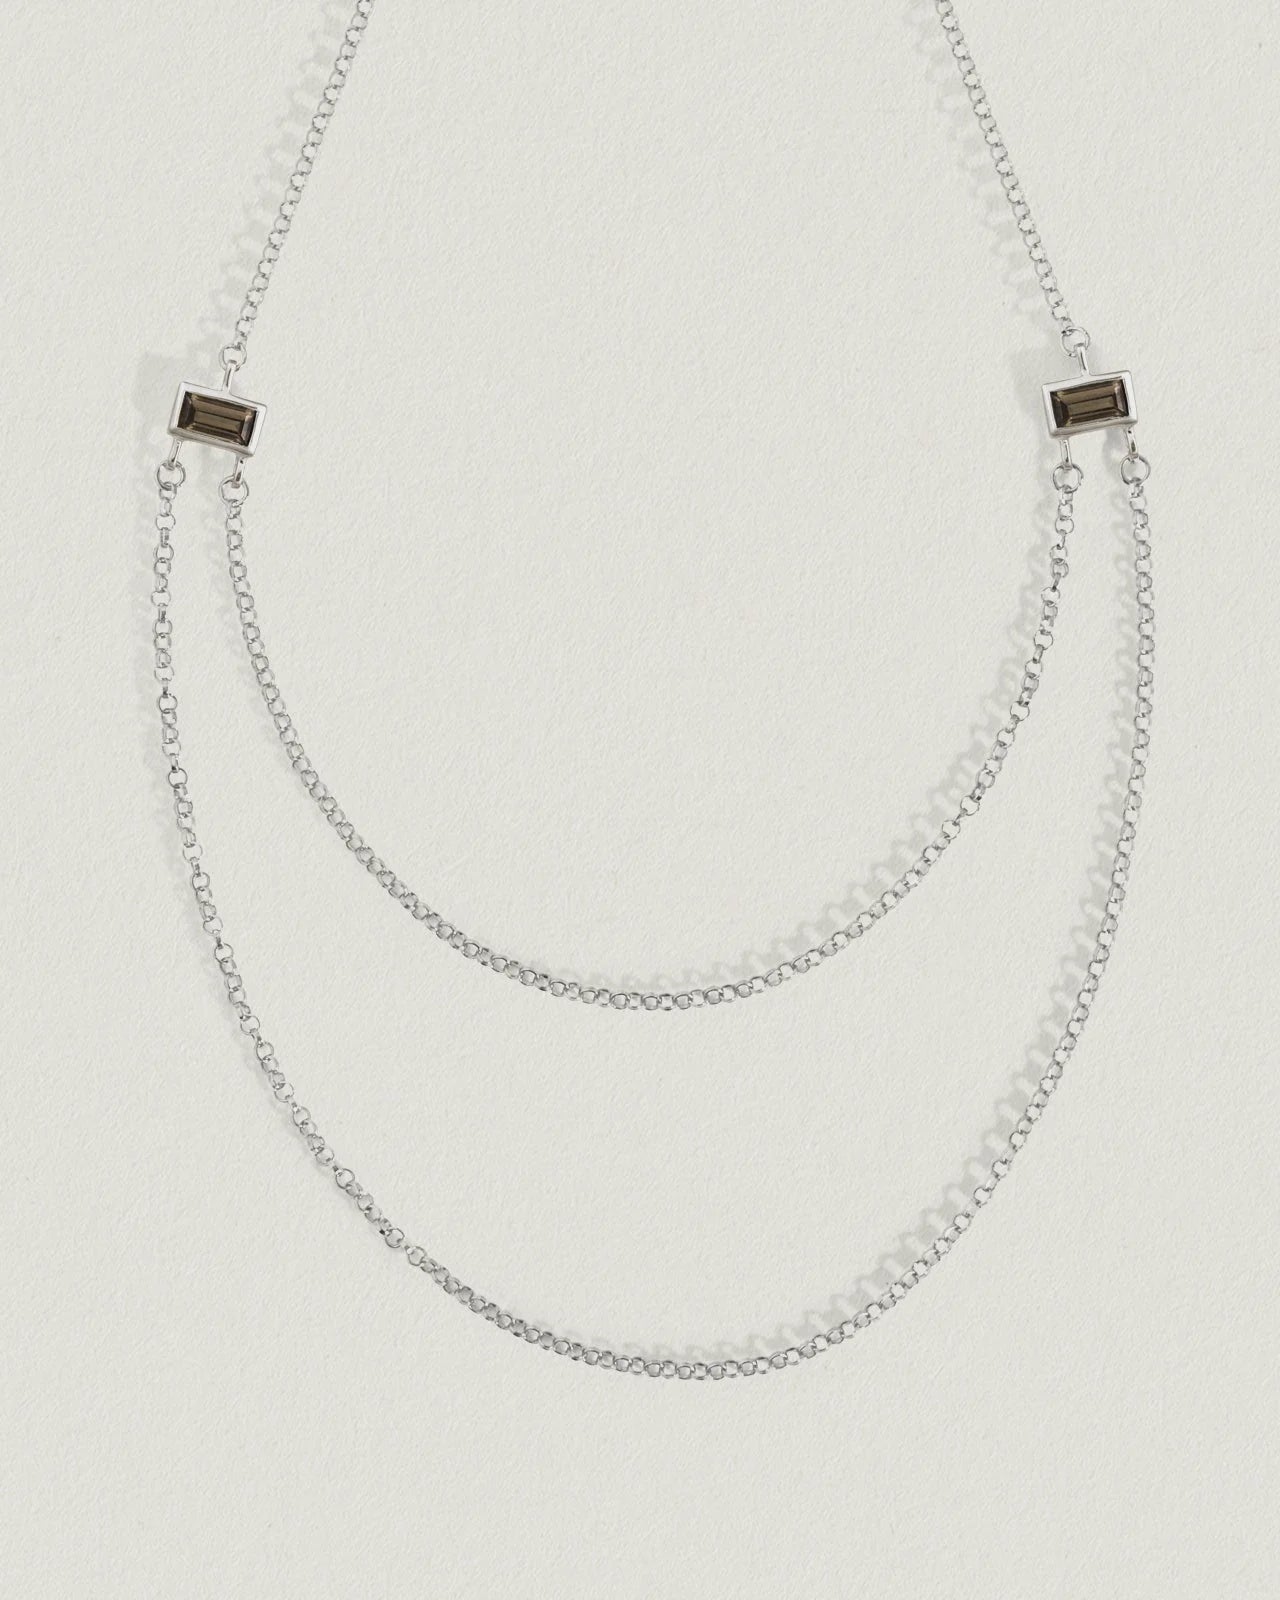 Hermes Necklace - Silver